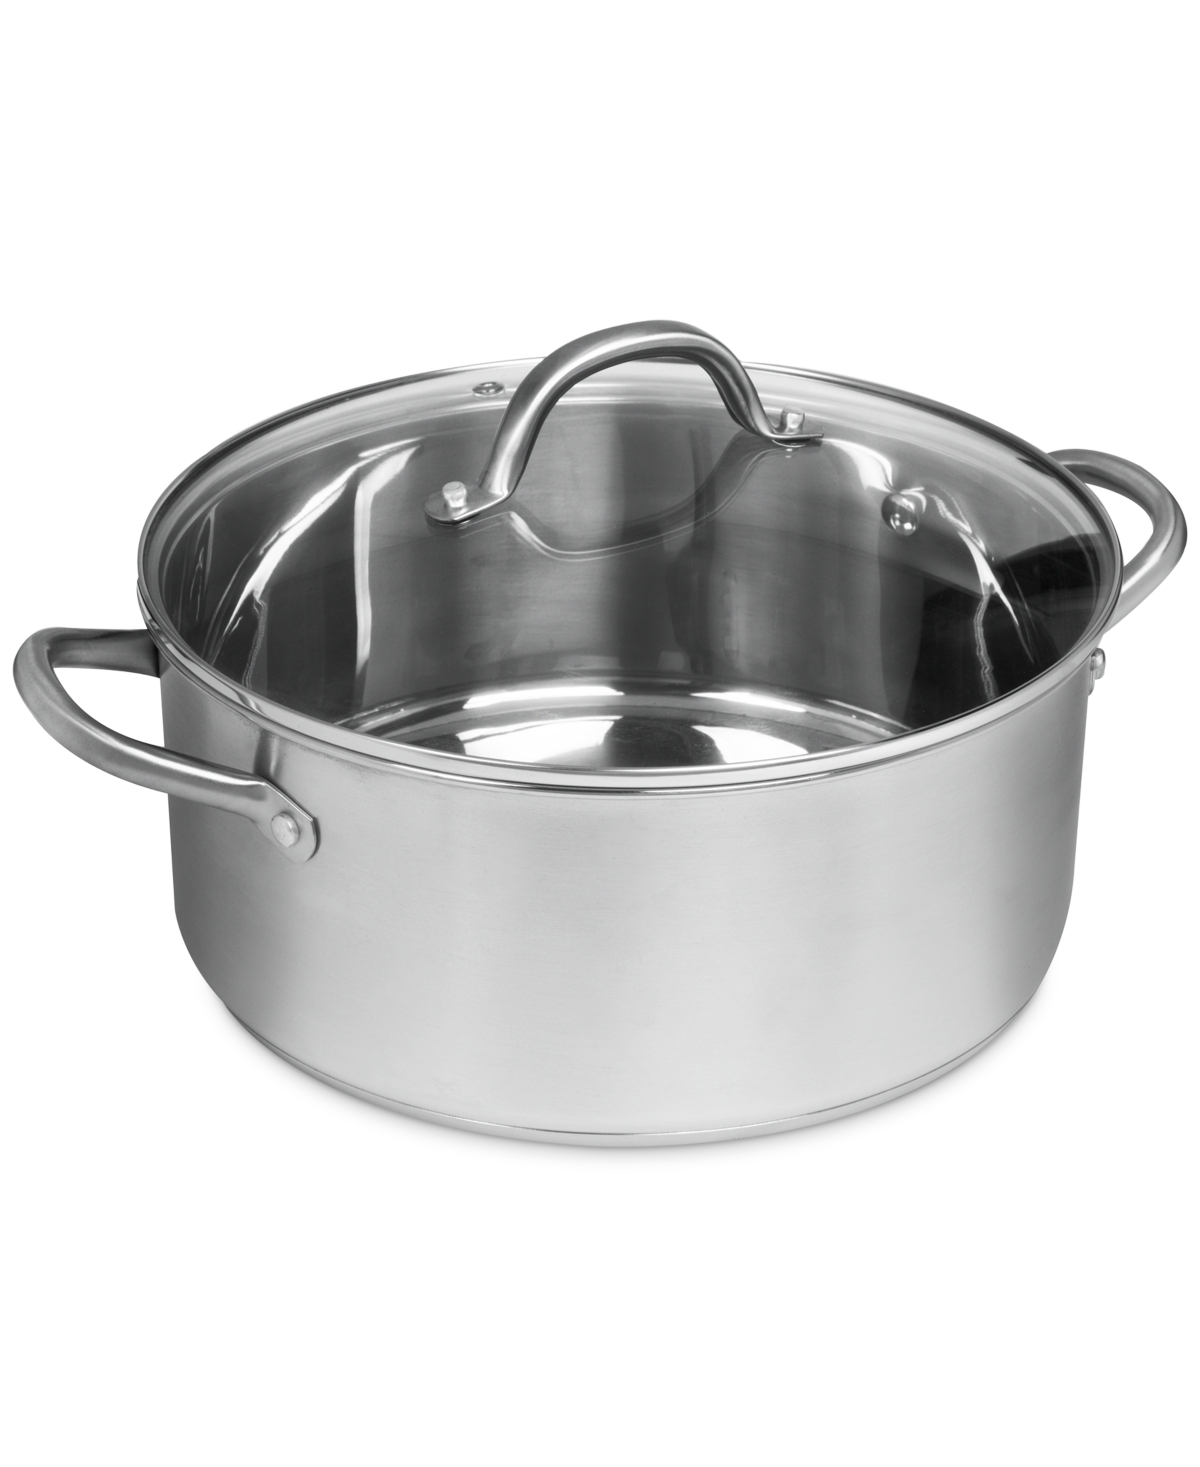 Dutch Oven 6 Qt Encapsulated Pot Stainless Steel Commercial Brush